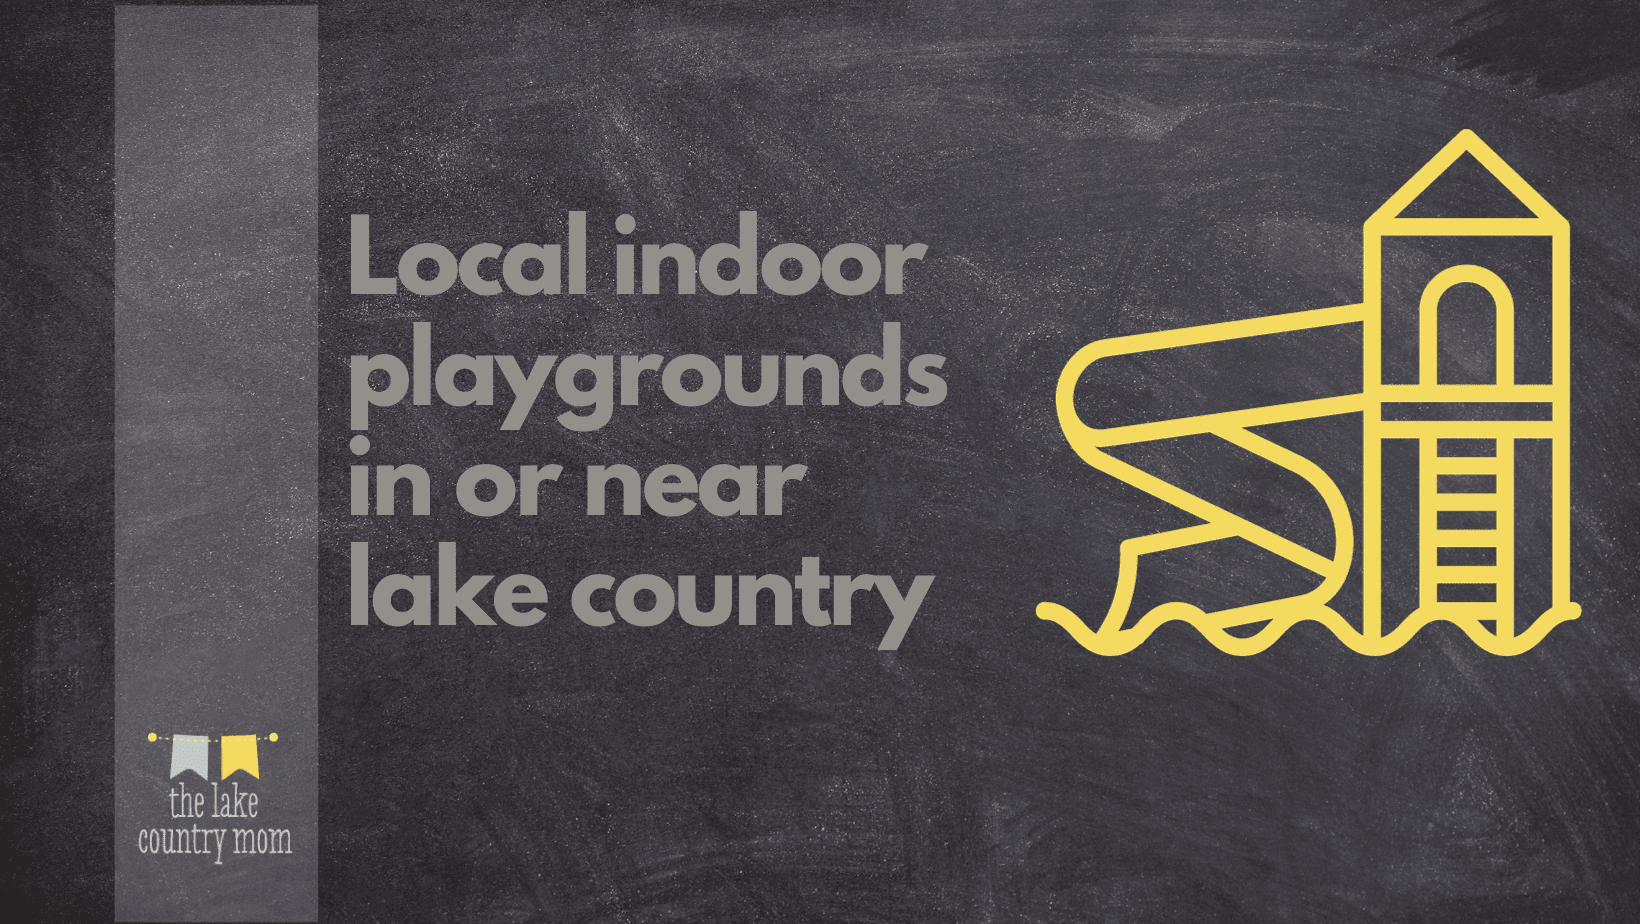 Indoor Playgrounds in or near lake country